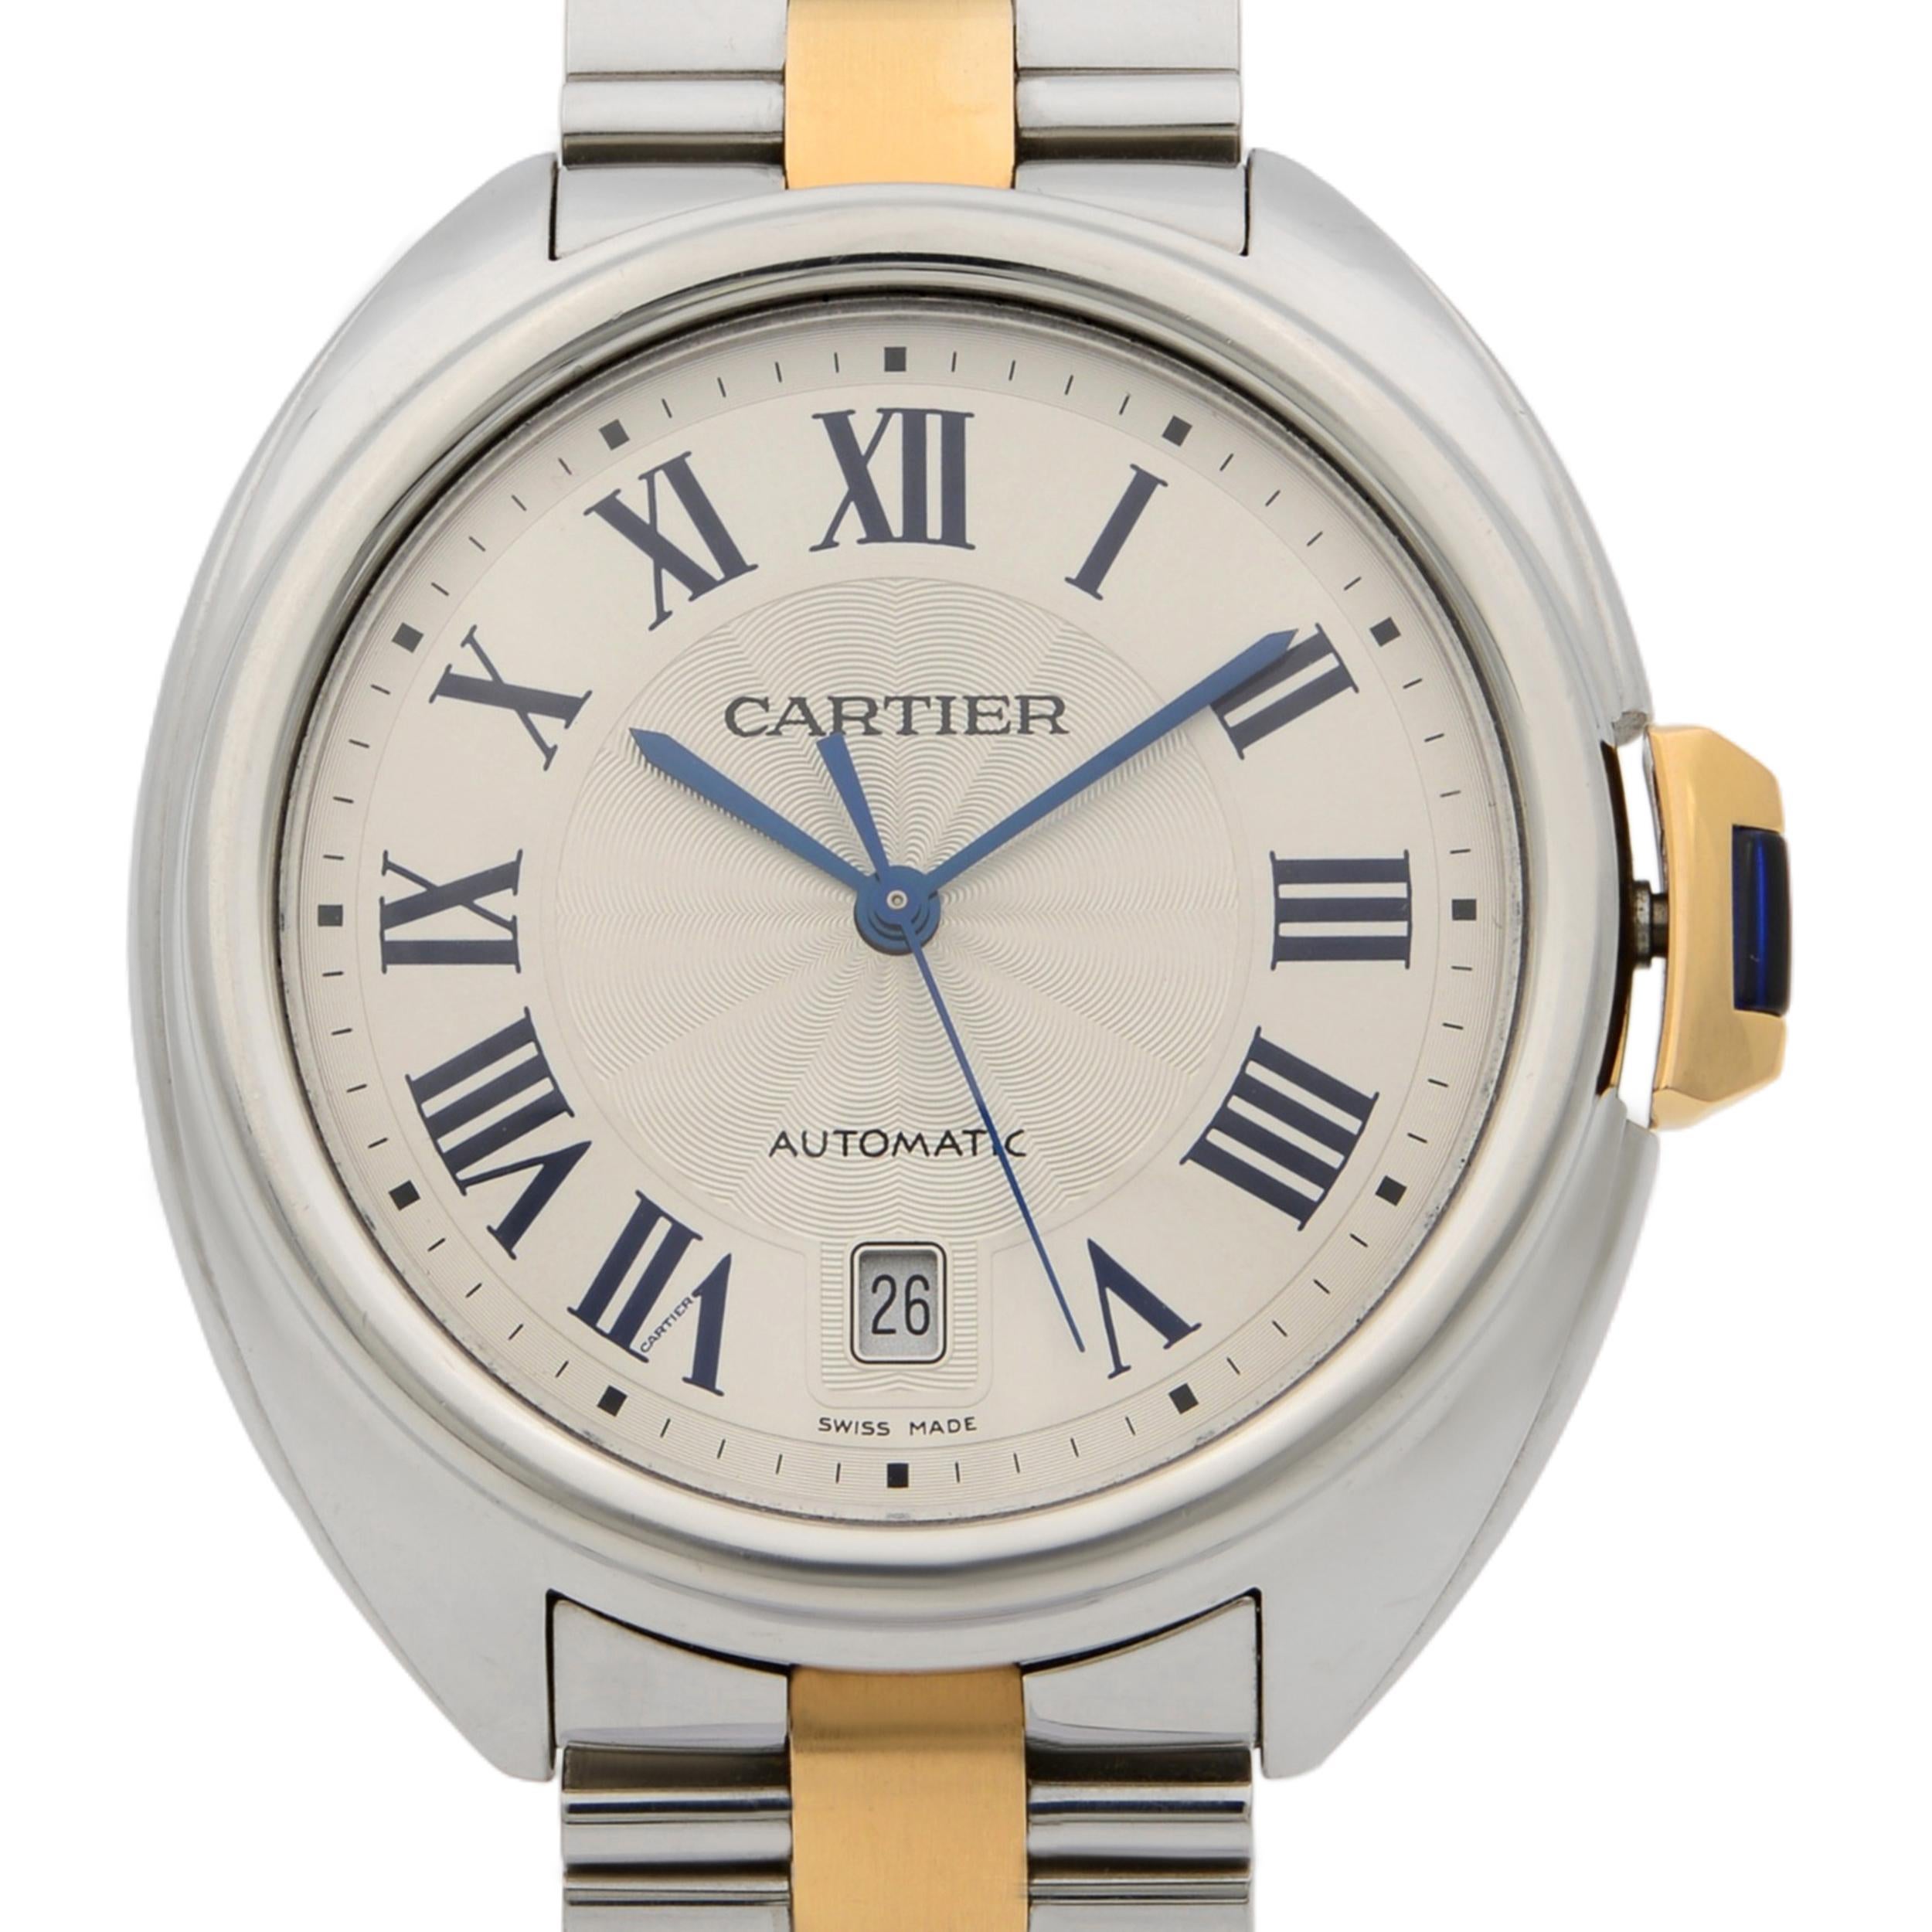 This pre-owned  Cle De Cartier W2CL0002 is a beautiful men's timepiece that is powered by mechanical (automatic) movement which is cased in a stainless steel case. It has a round shape face, date indicator dial and has roman numerals style hour